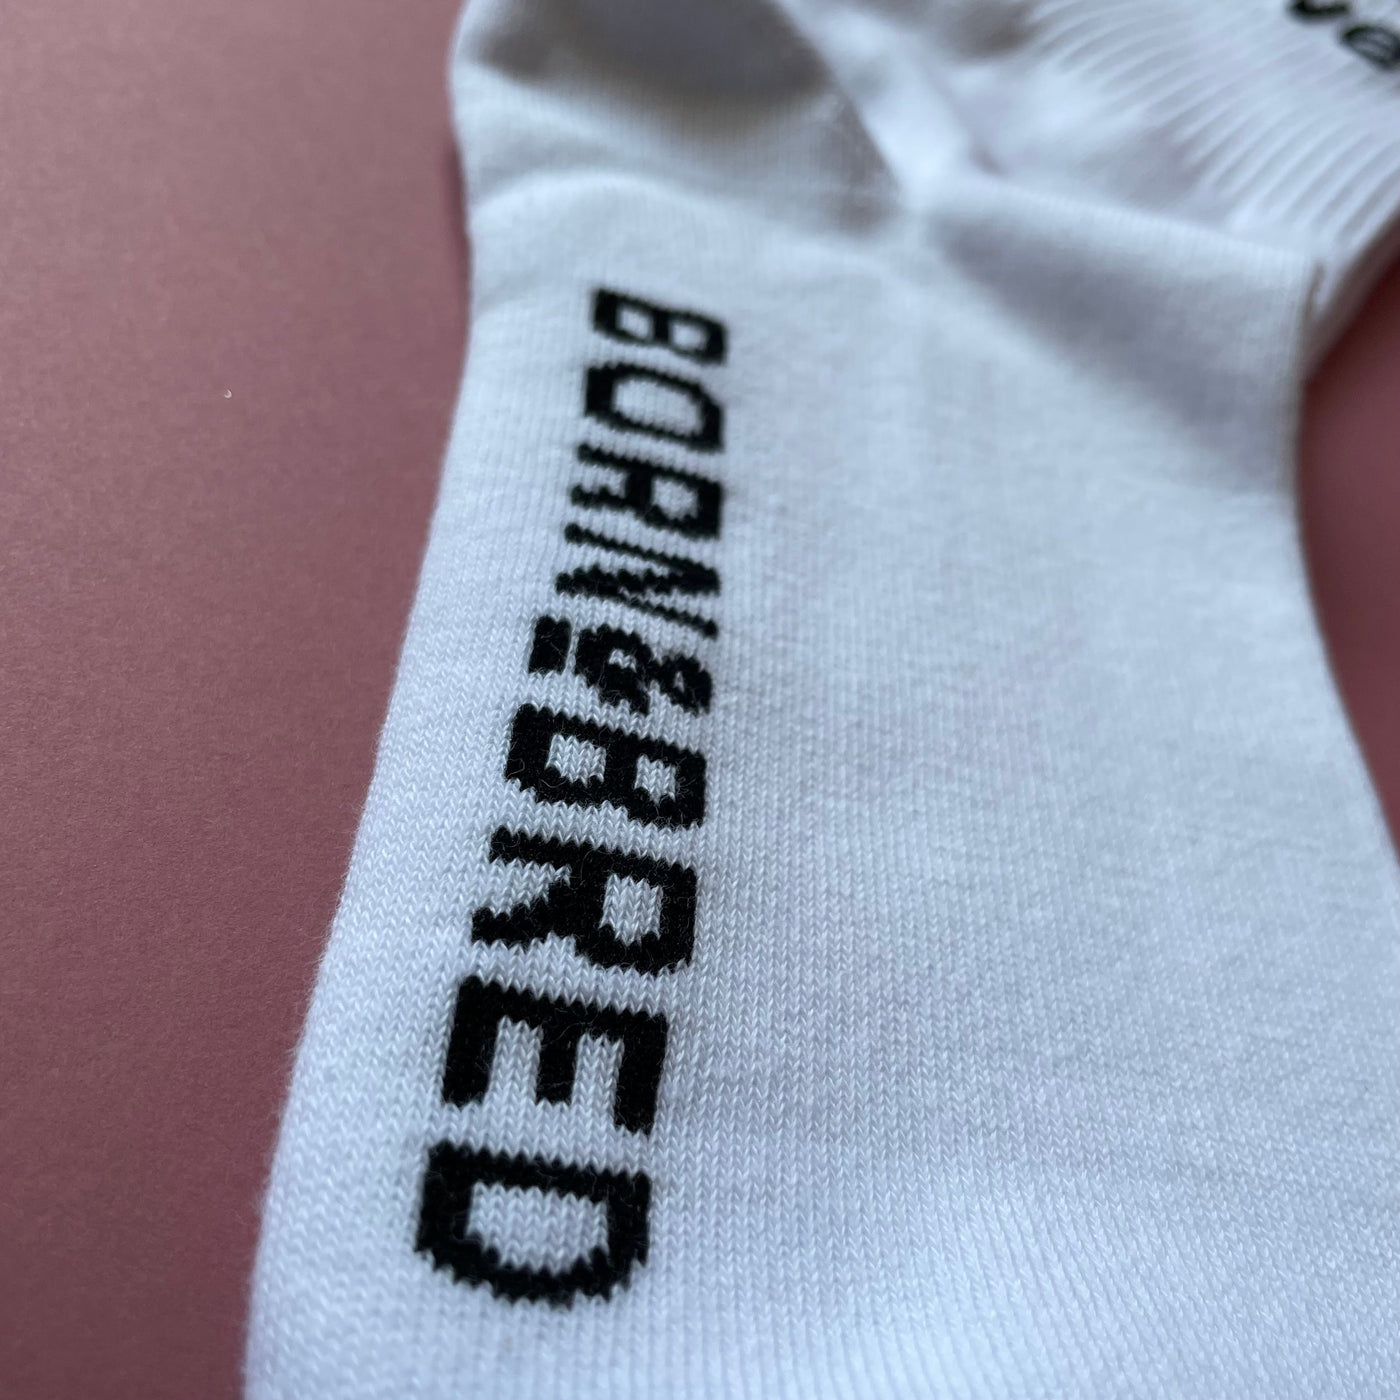 born and bred sock